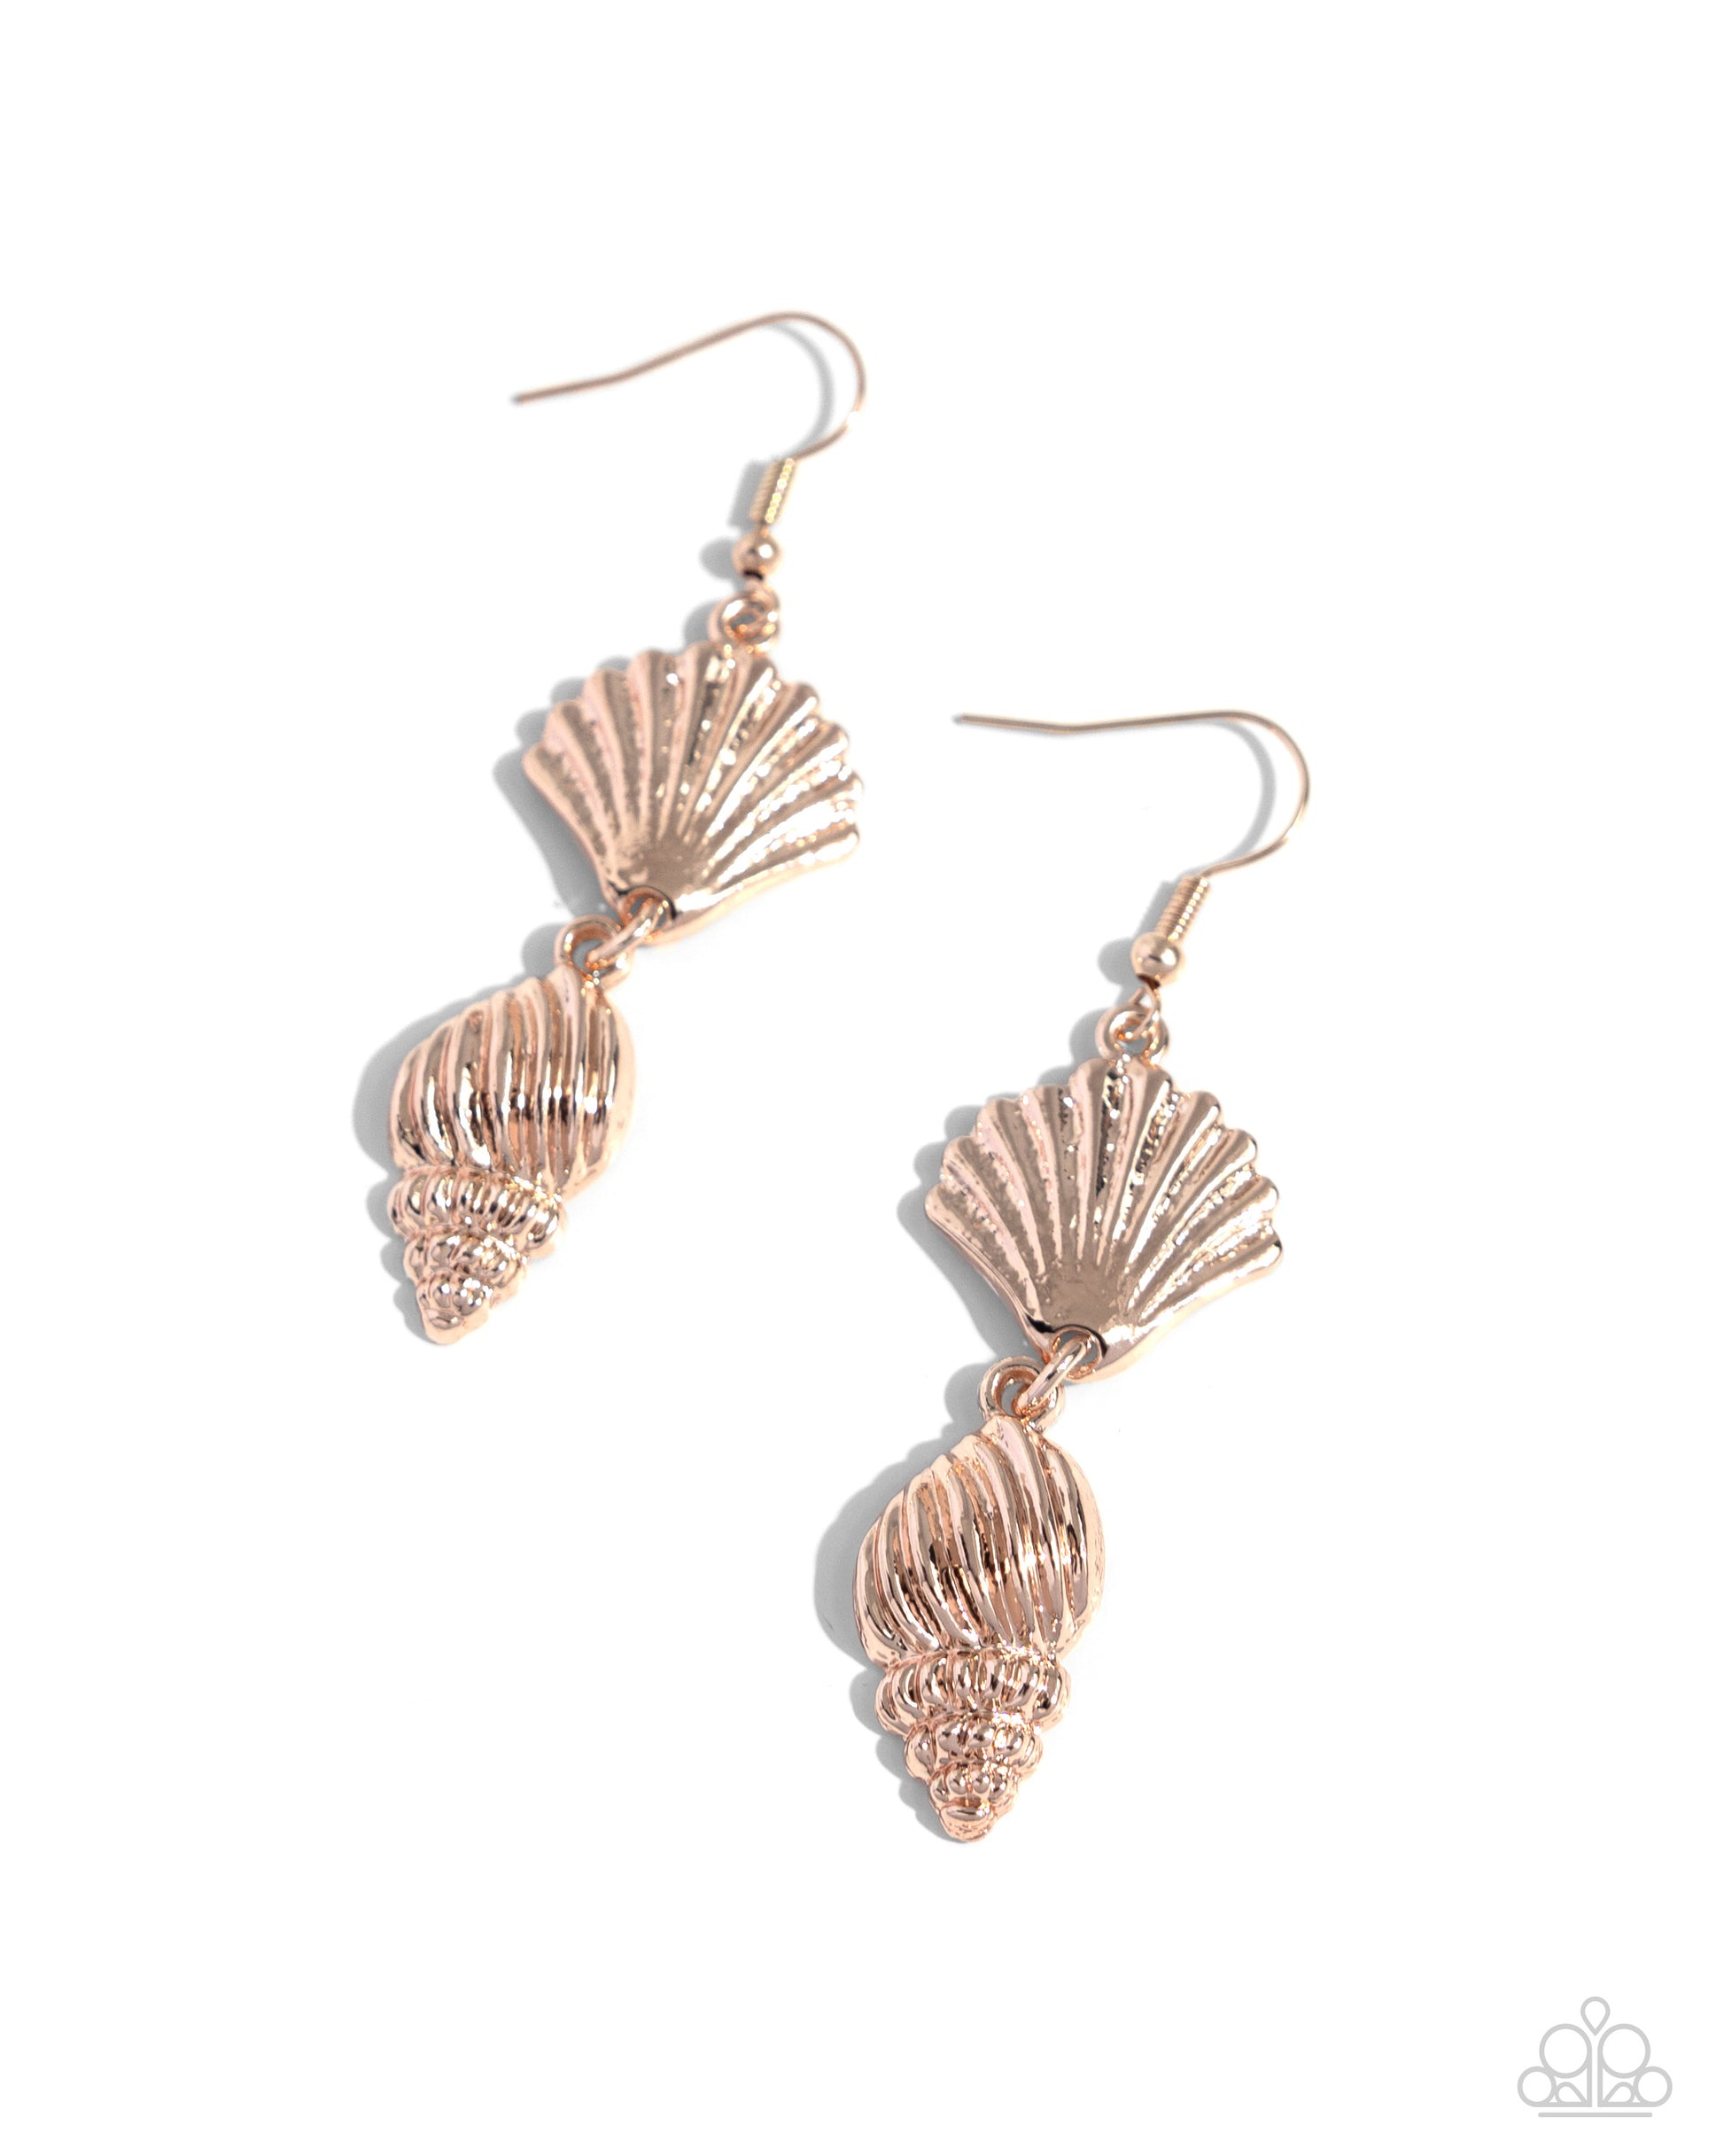 SHELL, I Was In the Area - rose gold - Paparazzi earrings